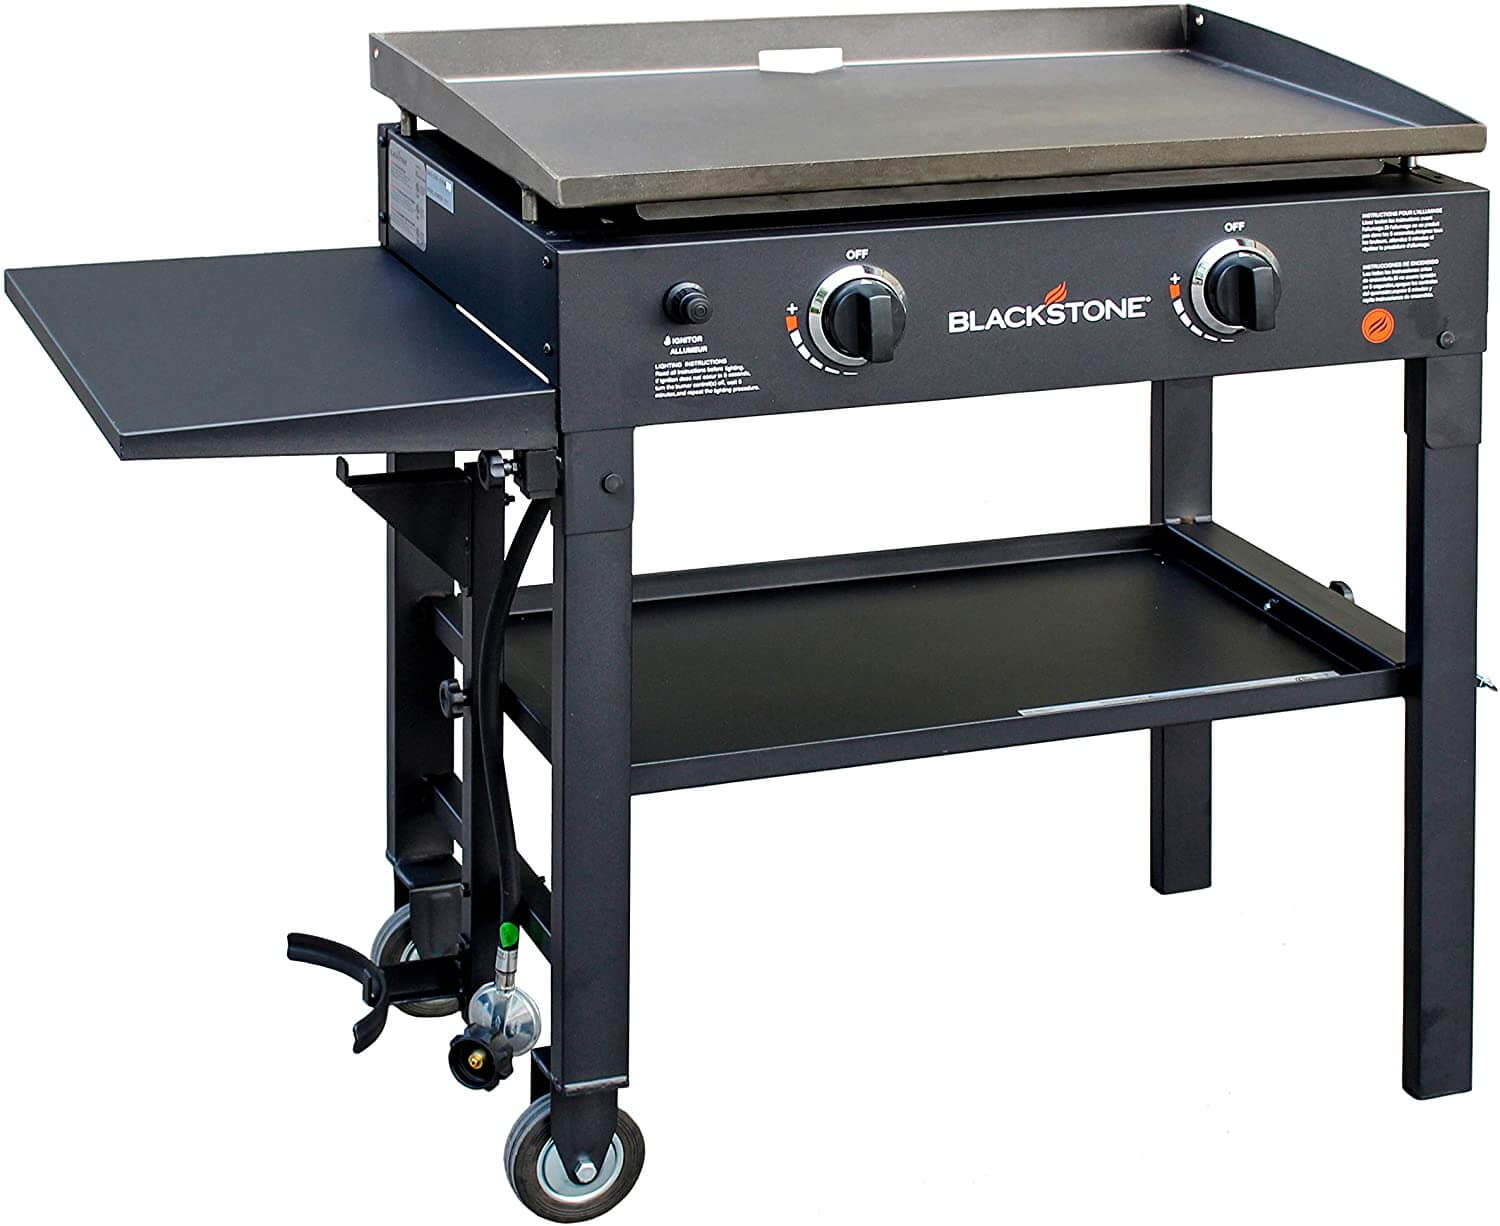 Blackstone 28 inch Outdoor Flat Top Gas Grill